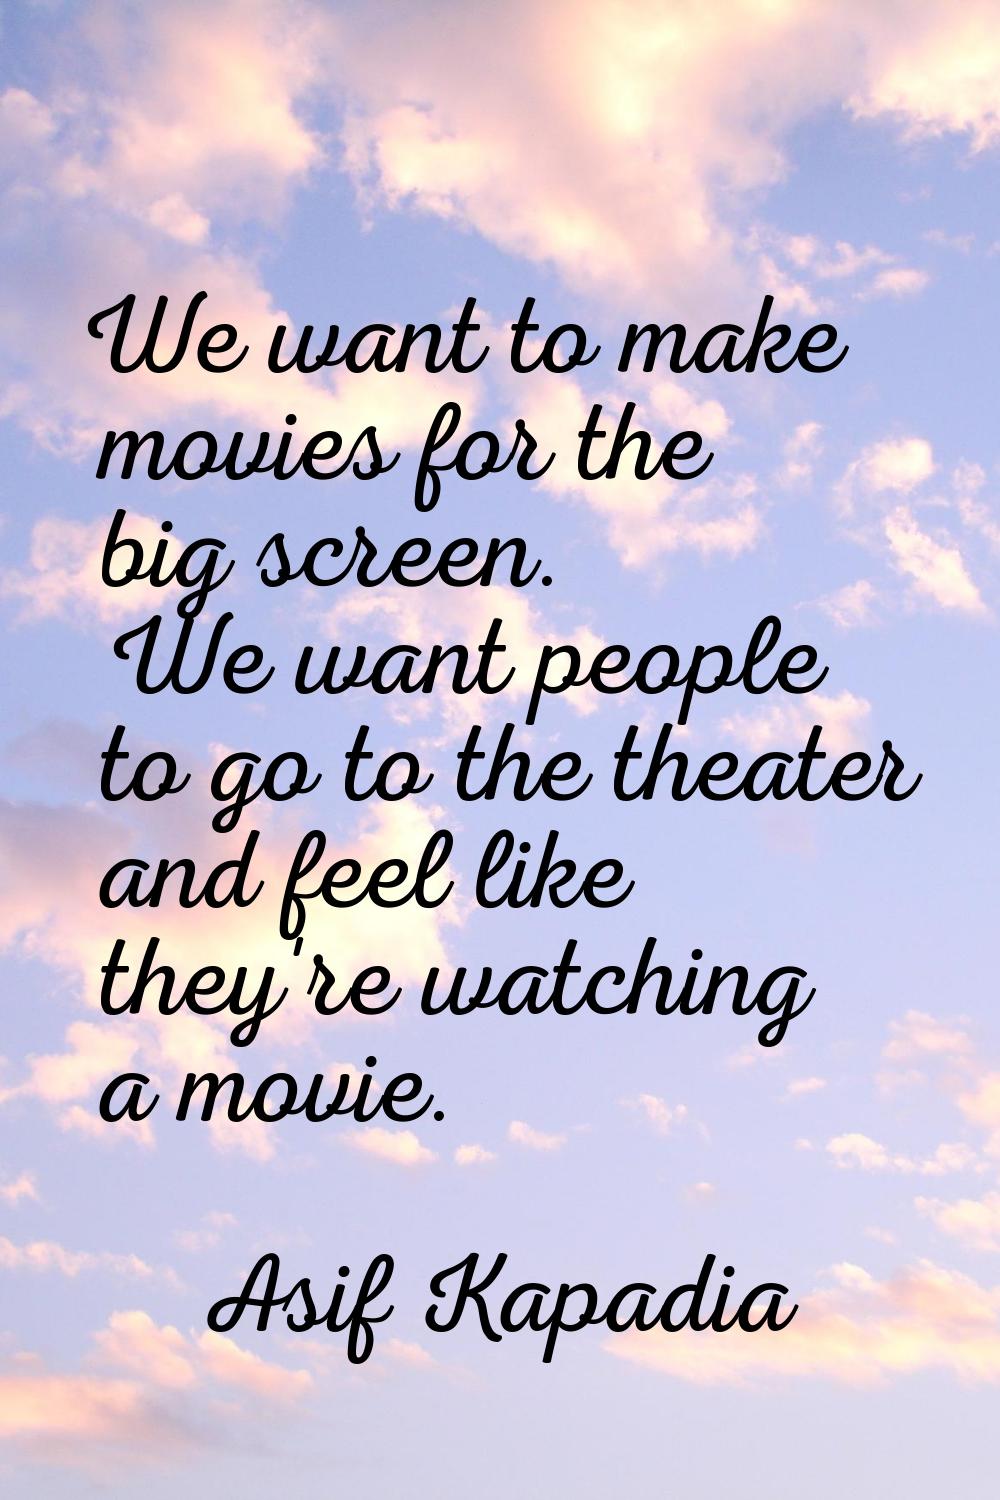 We want to make movies for the big screen. We want people to go to the theater and feel like they'r